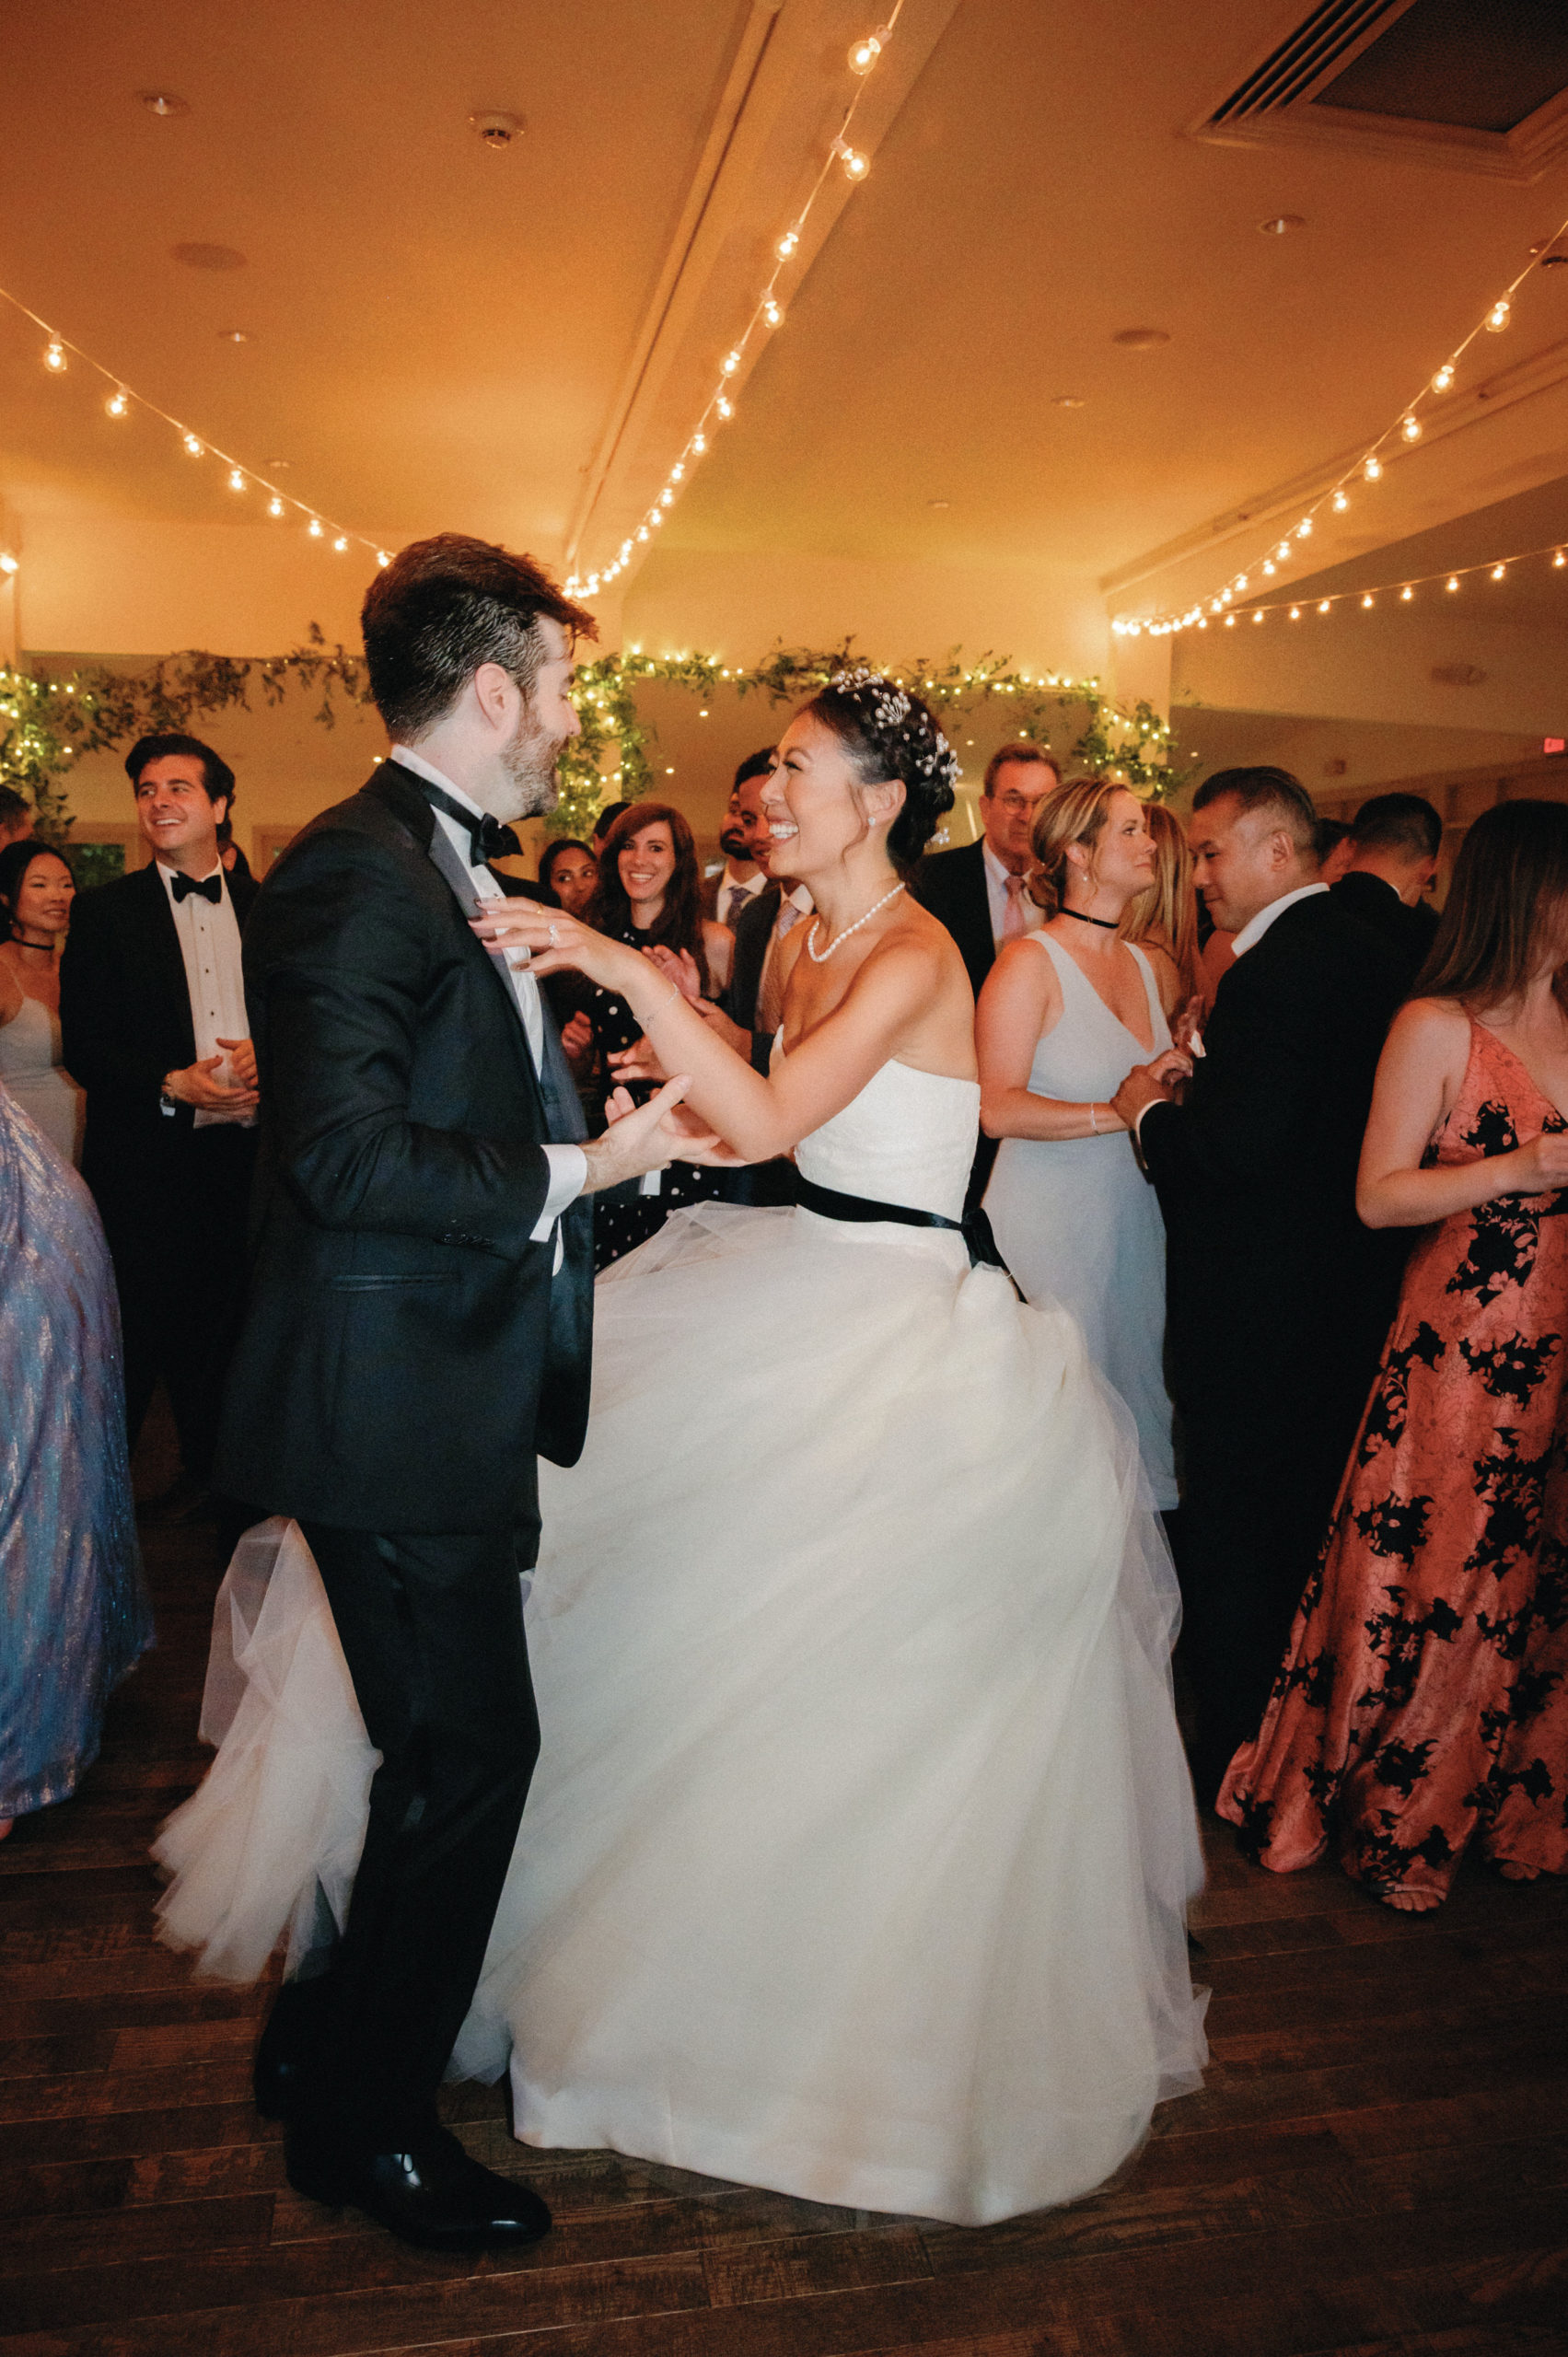 The bride and groom are happily dancing with the guests. Image by Jenny Fu Studio